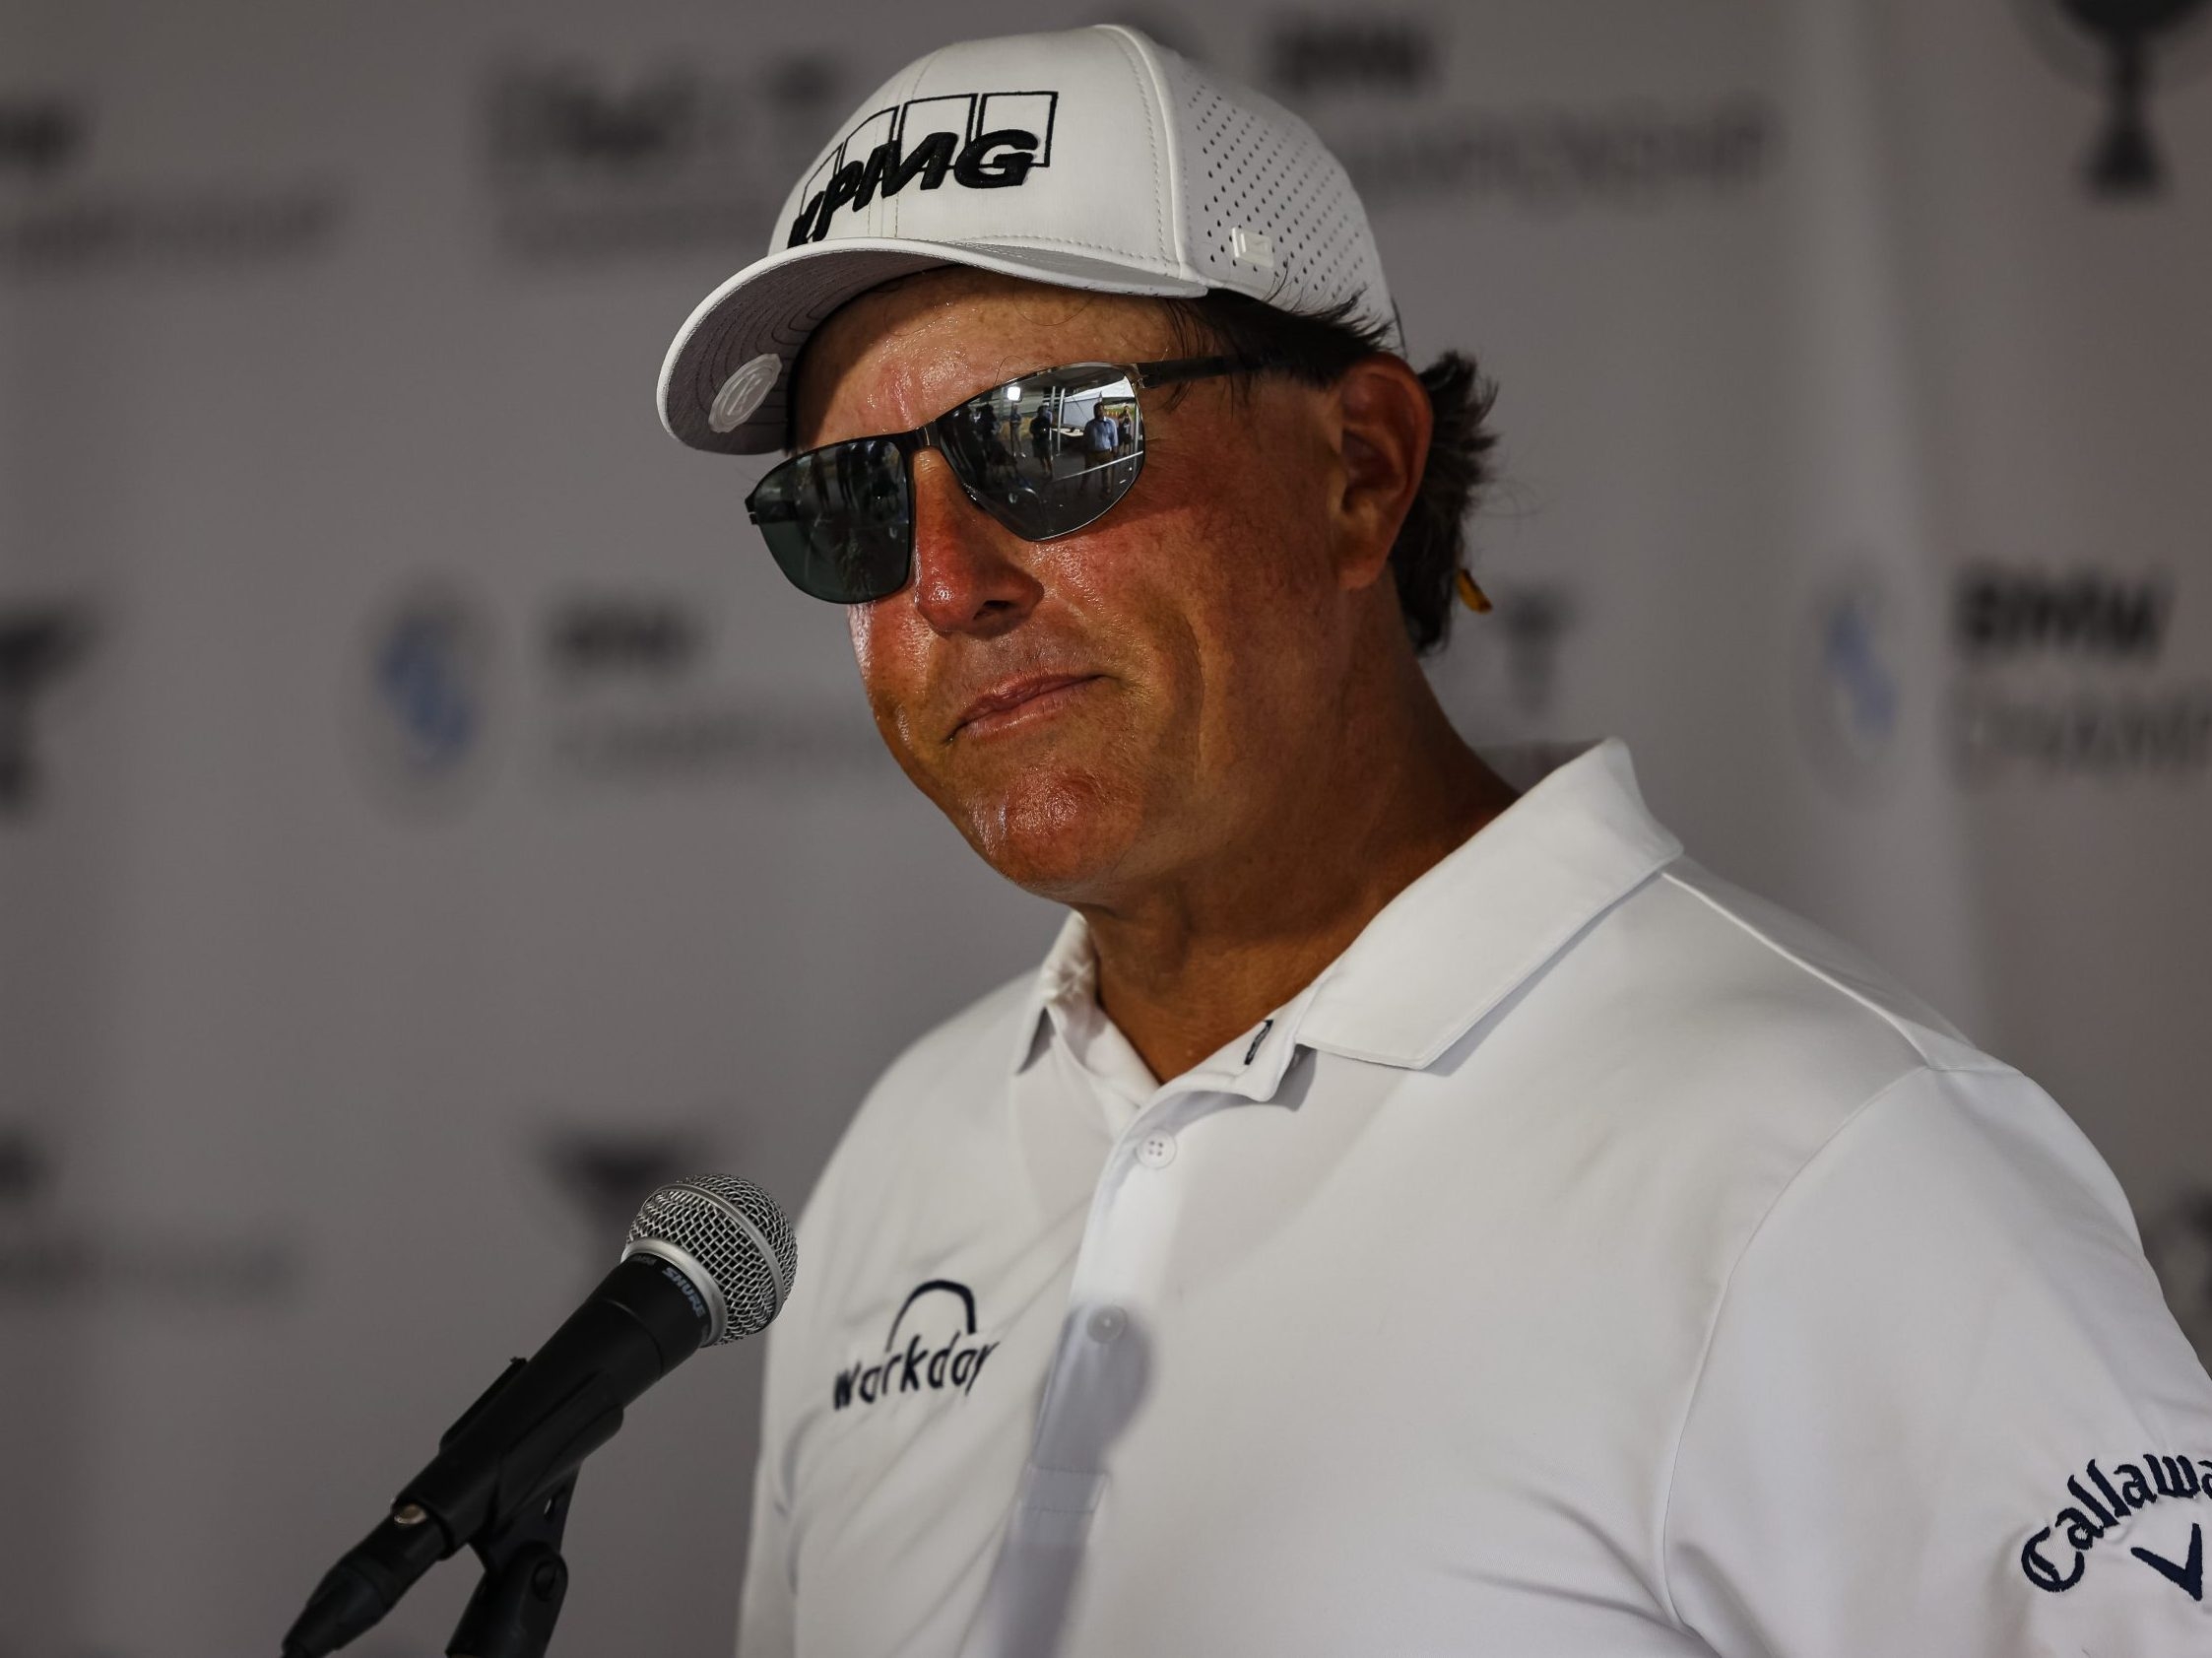 'This is PATHETIC' Phil Mickelson blasts USGA over proposed driver